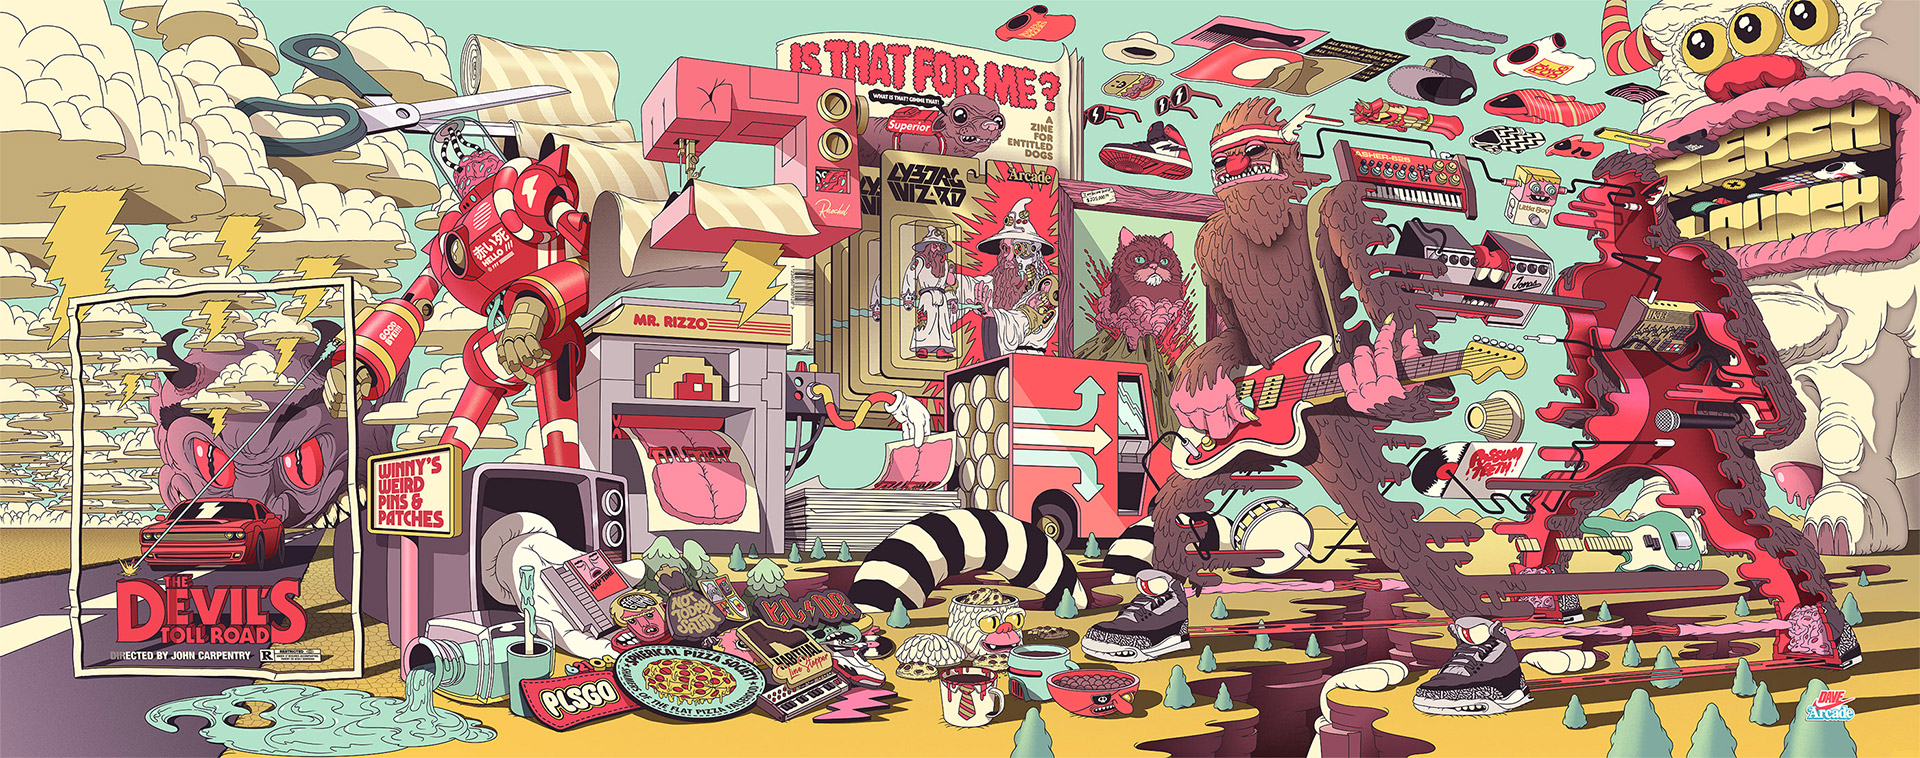 Cool Illustrations & Murals by Dave Arcade | Daily design inspiration ...